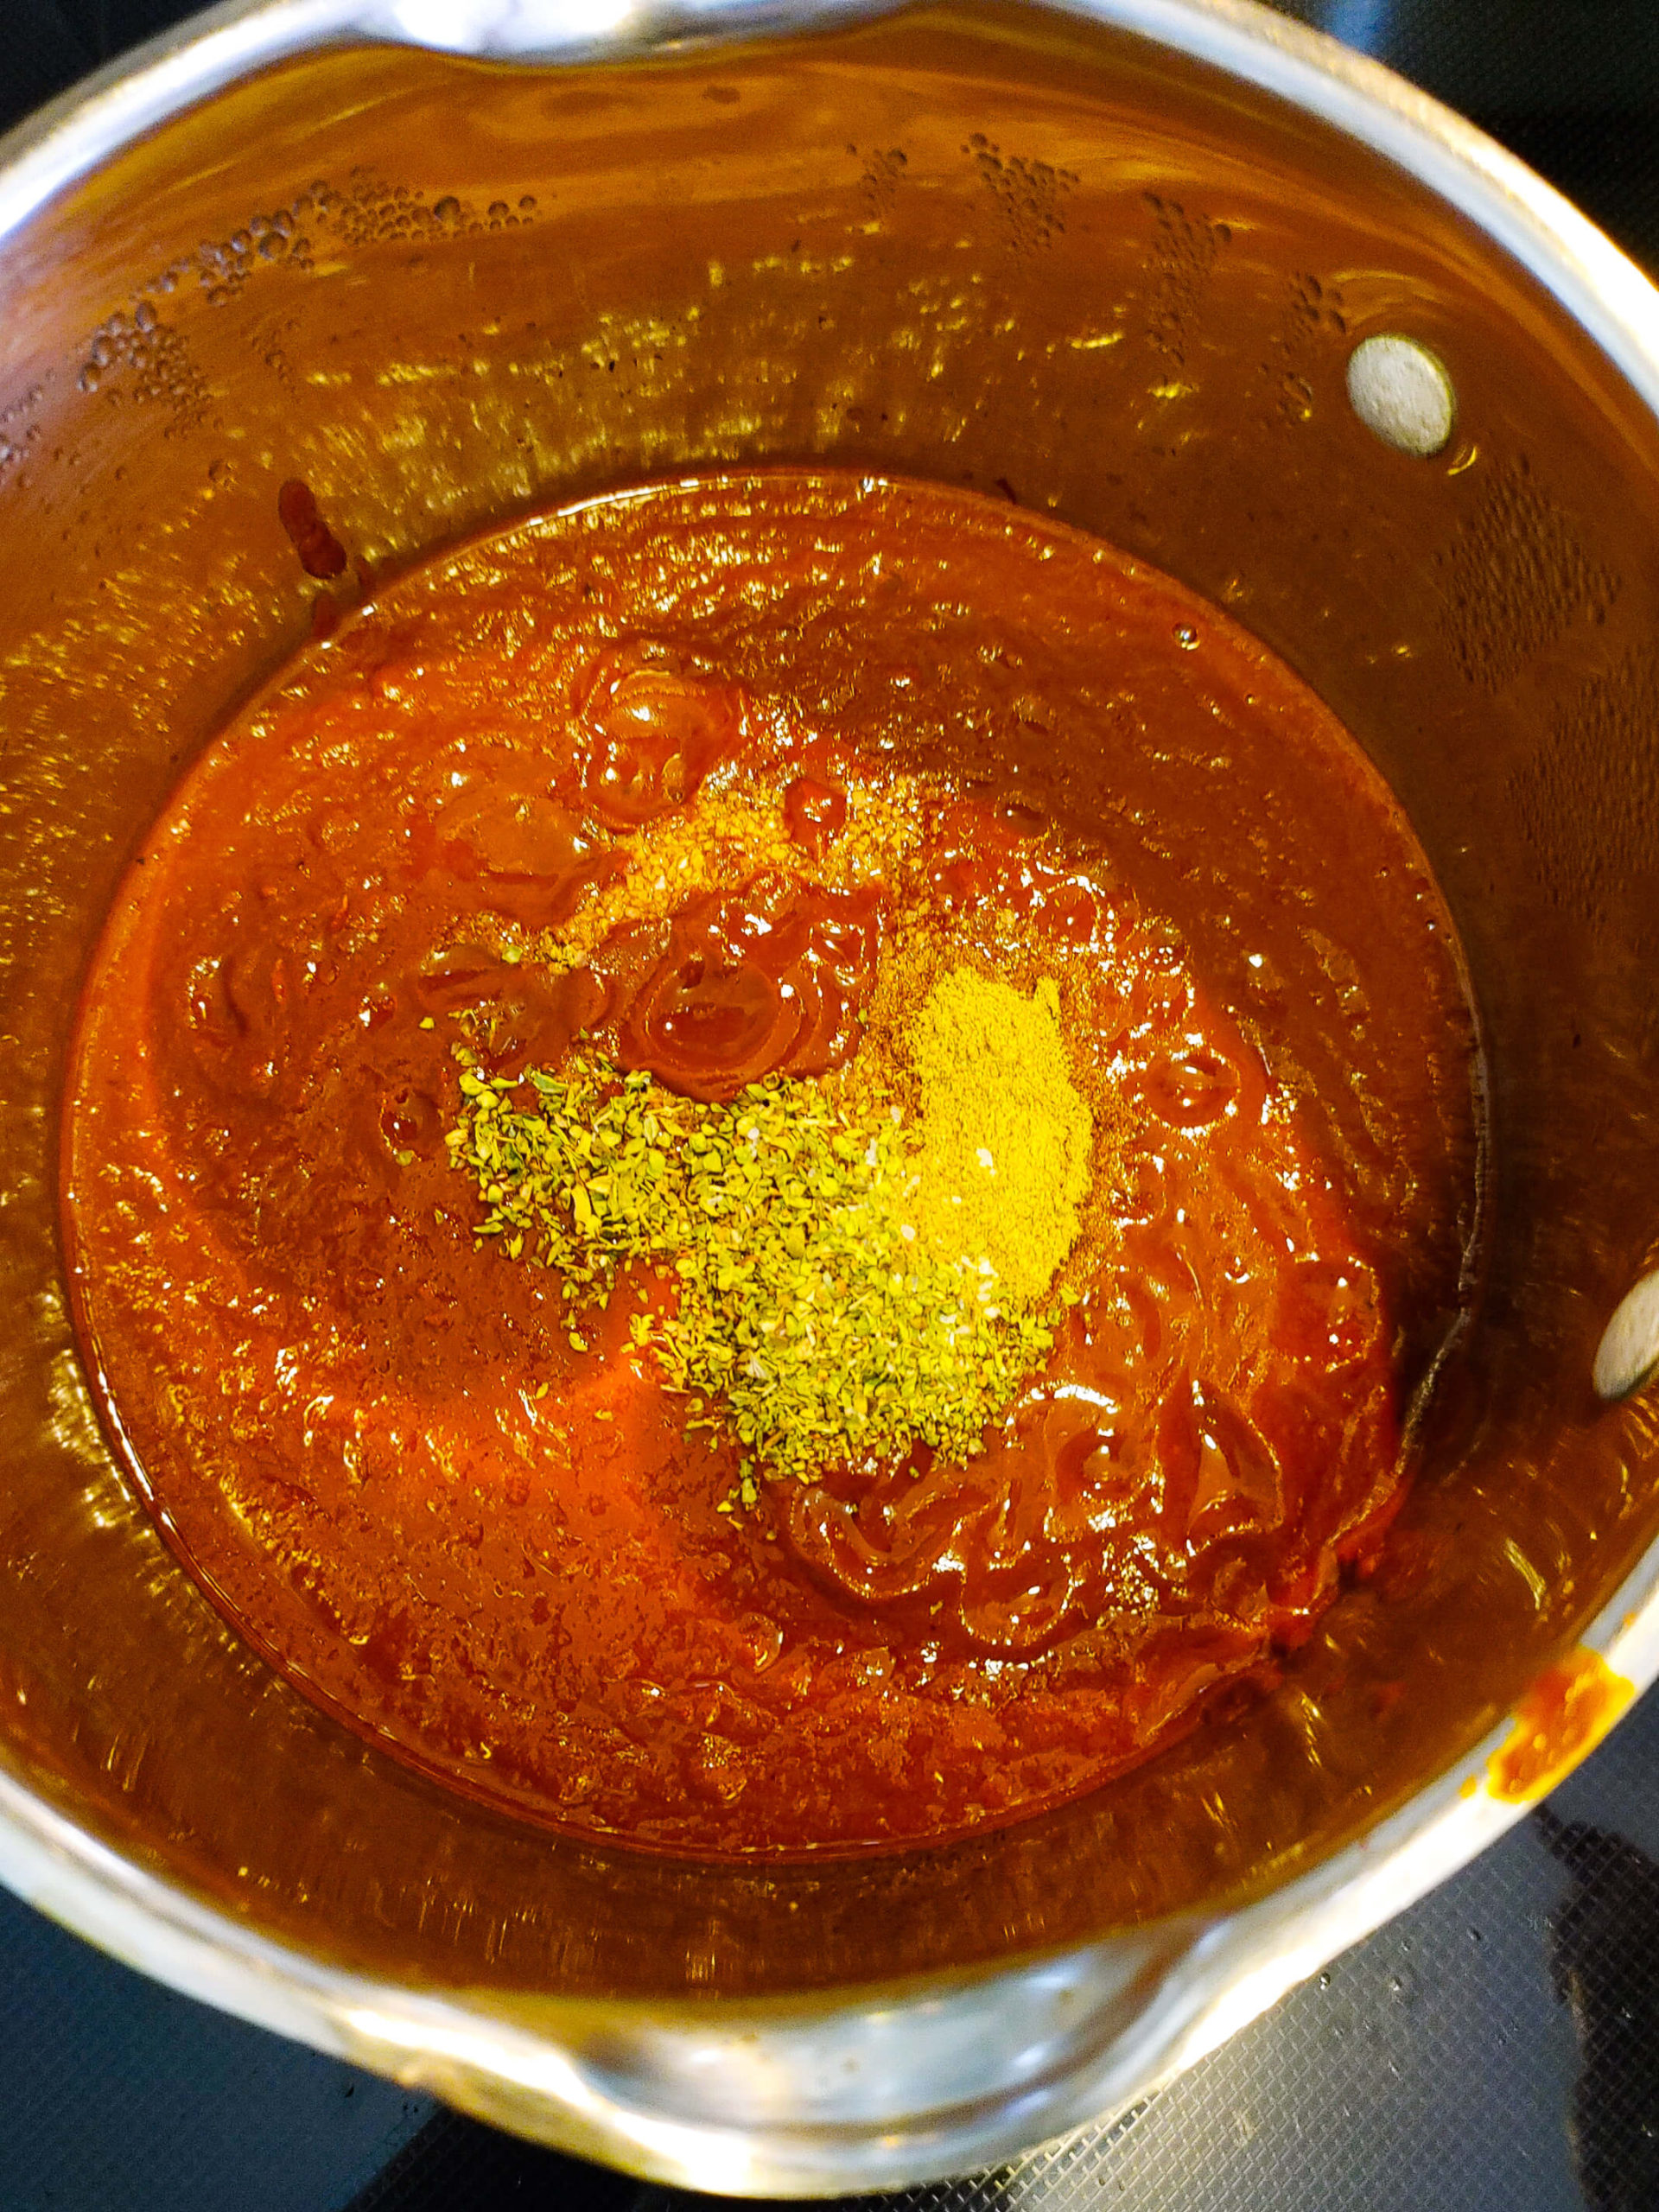 ADD PUREE TO THE POT AND SIMMER ON LOW FOR 30 MIN